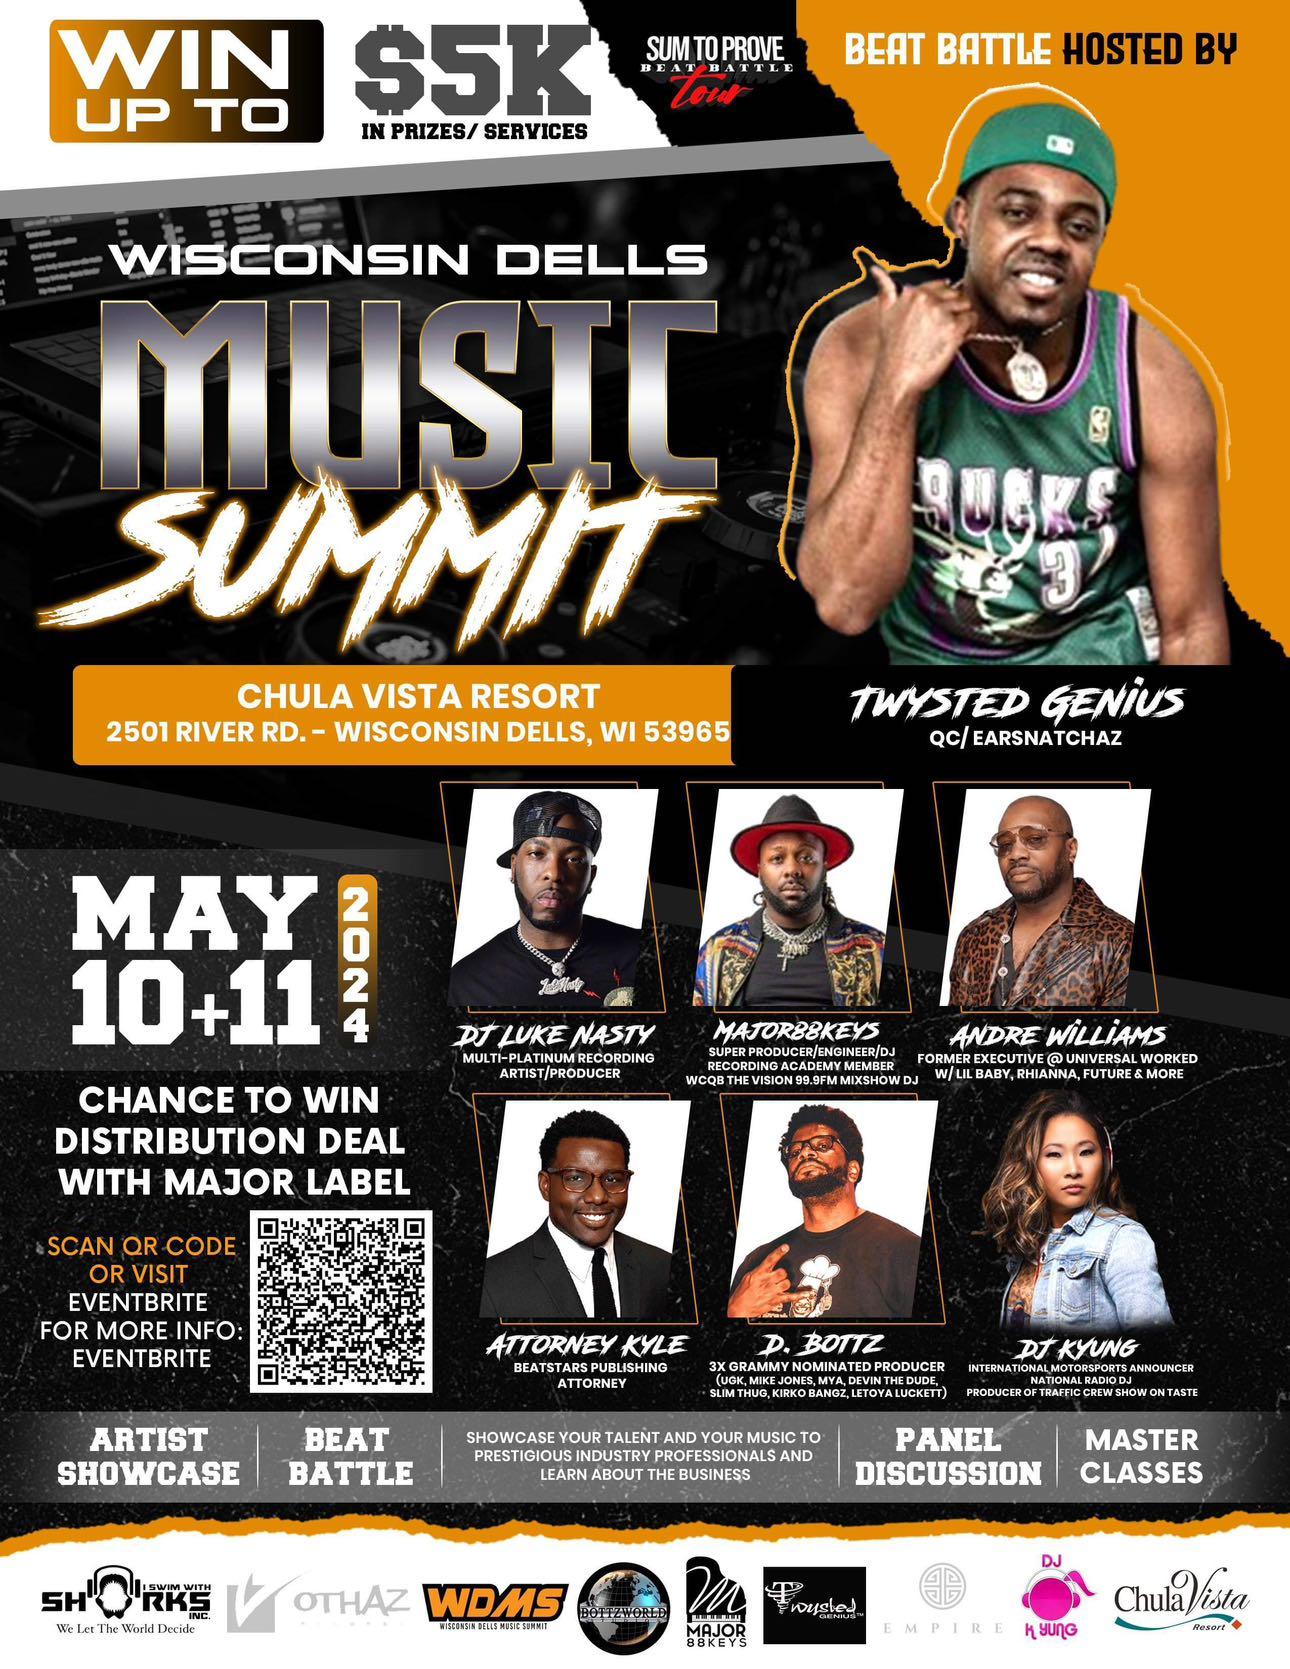 Bigga$tate And Sip The Kid Resumes Netflix Tour With A Partnership From The Wisconsin Dells Music Summit